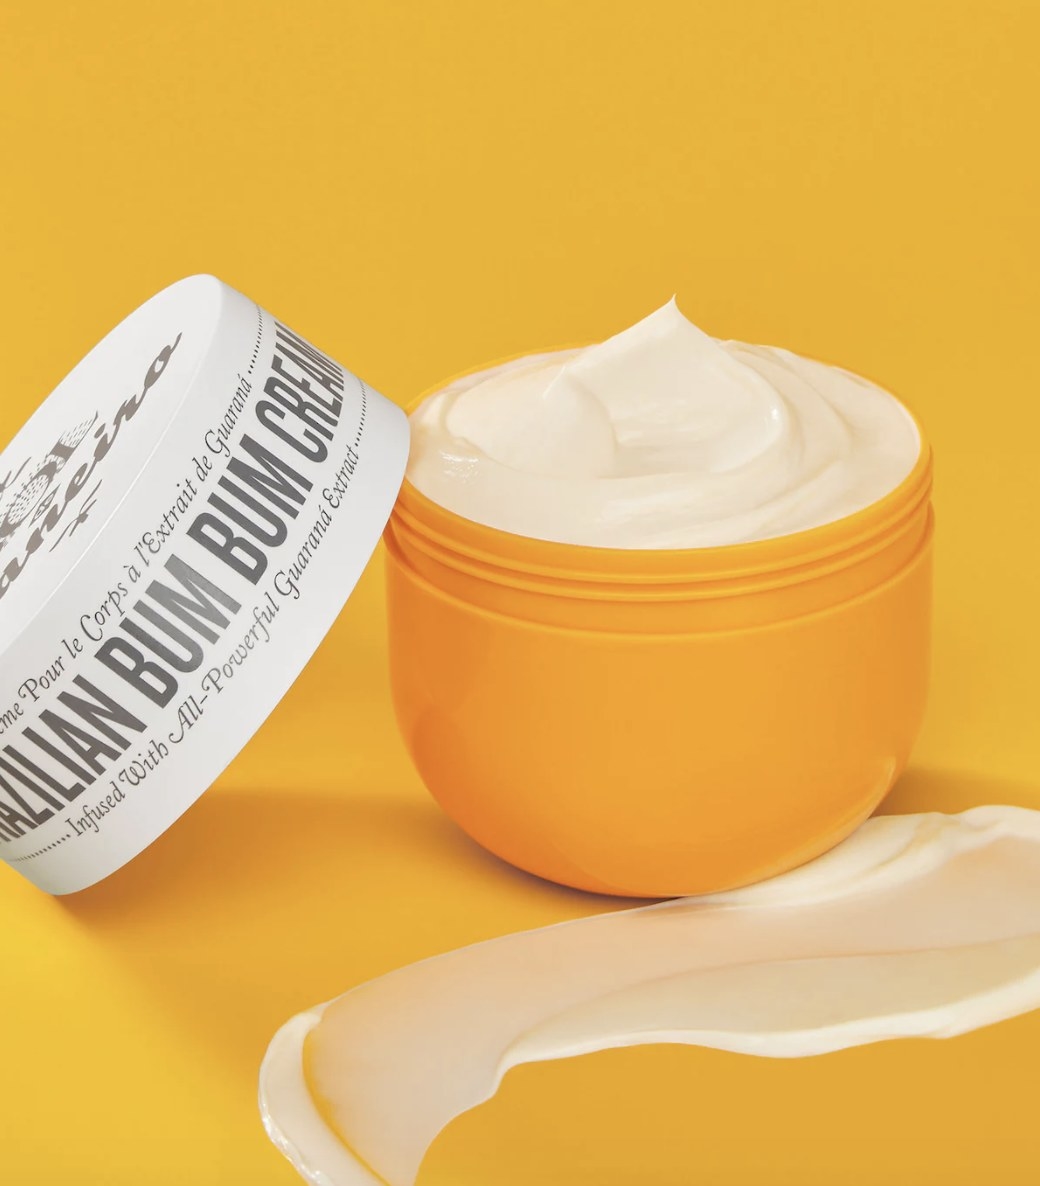 The orange container is holding white cream and has a white lid that says &quot;BRAZILIAN BUM BUM CREAN&quot; against an orange background